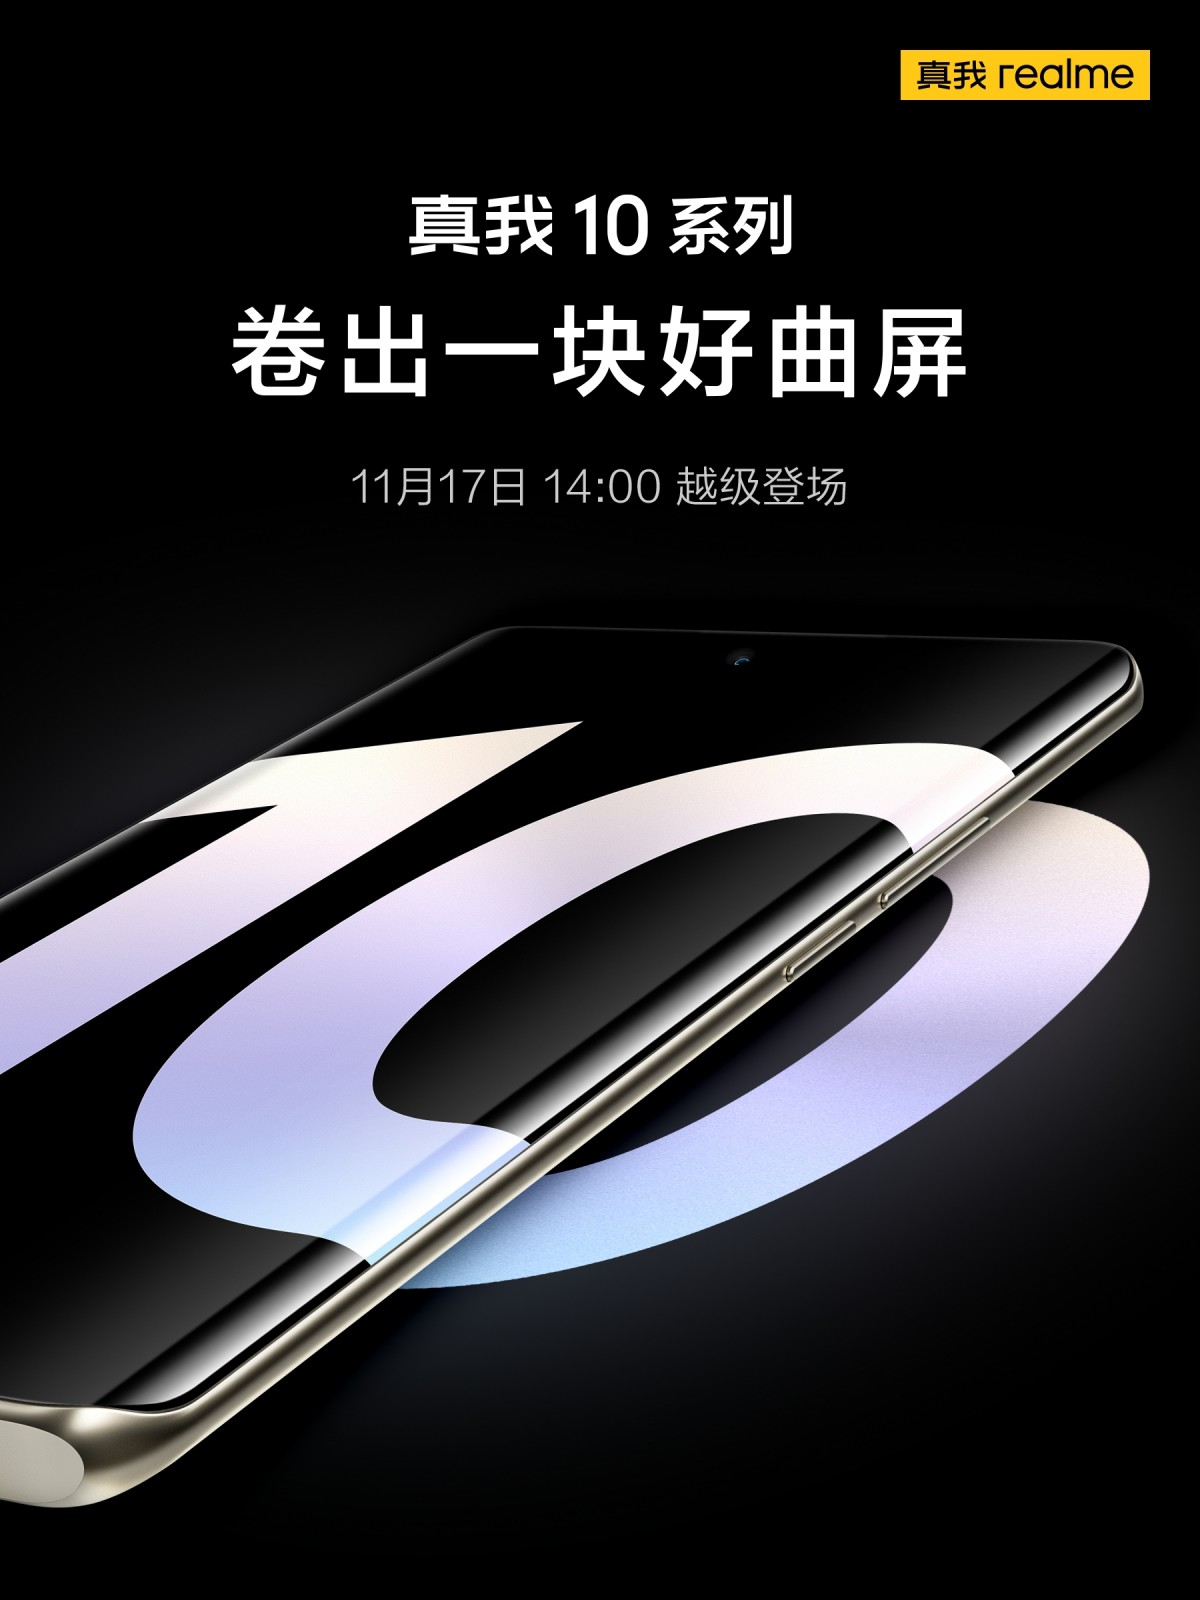 Realme 10 series arriving in China on November 17, 5G and Pro+ variants expected